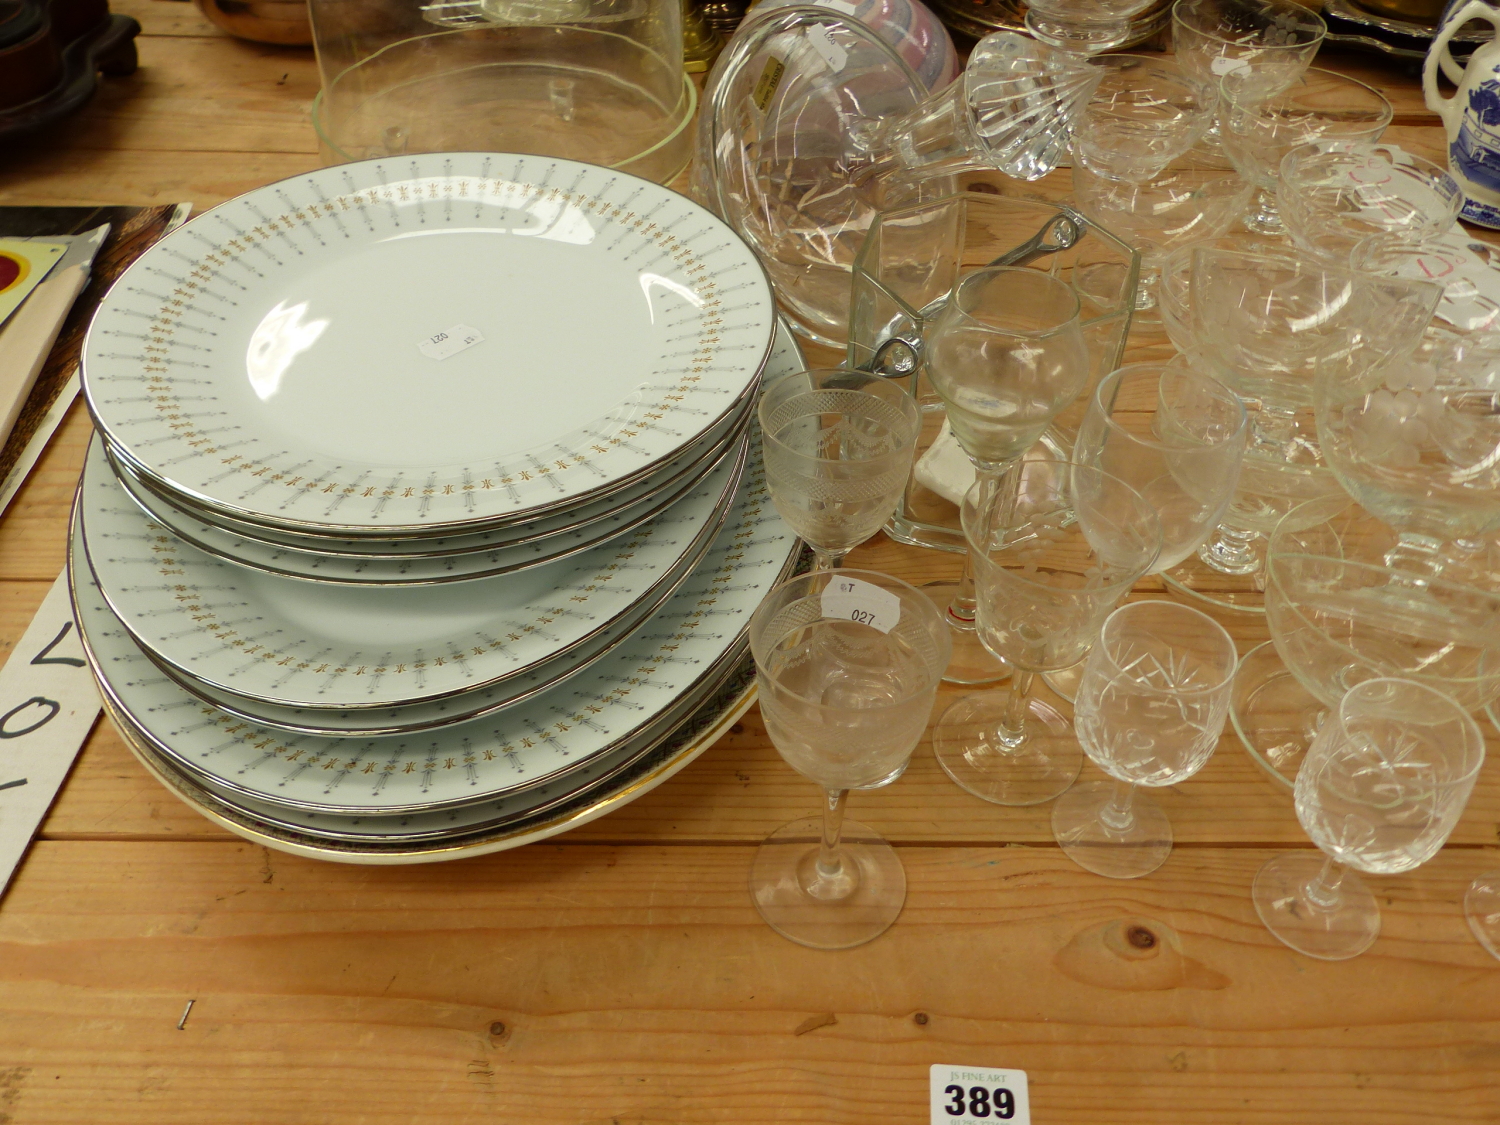 NORITAKE TIFFANY PATTERN PLATES AND PLATTERS, A GLASS DECANTER, A CHEESE COVER AND STAND,